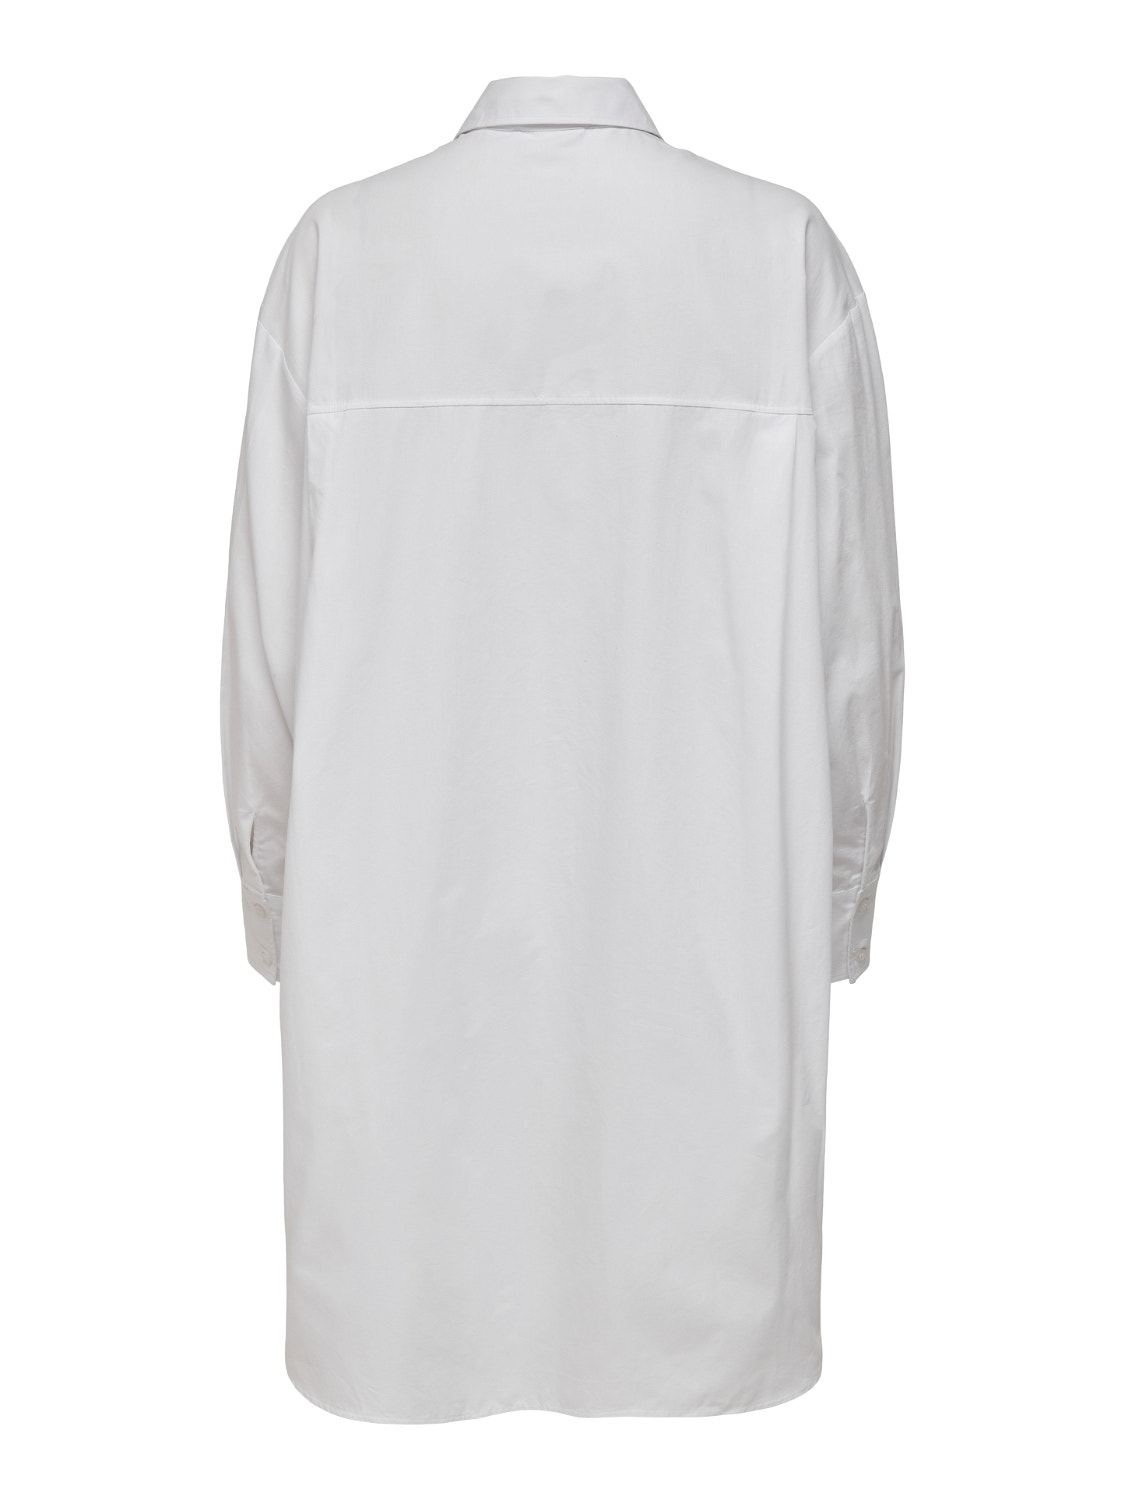 ONLY Long Shirt -White - 15249492